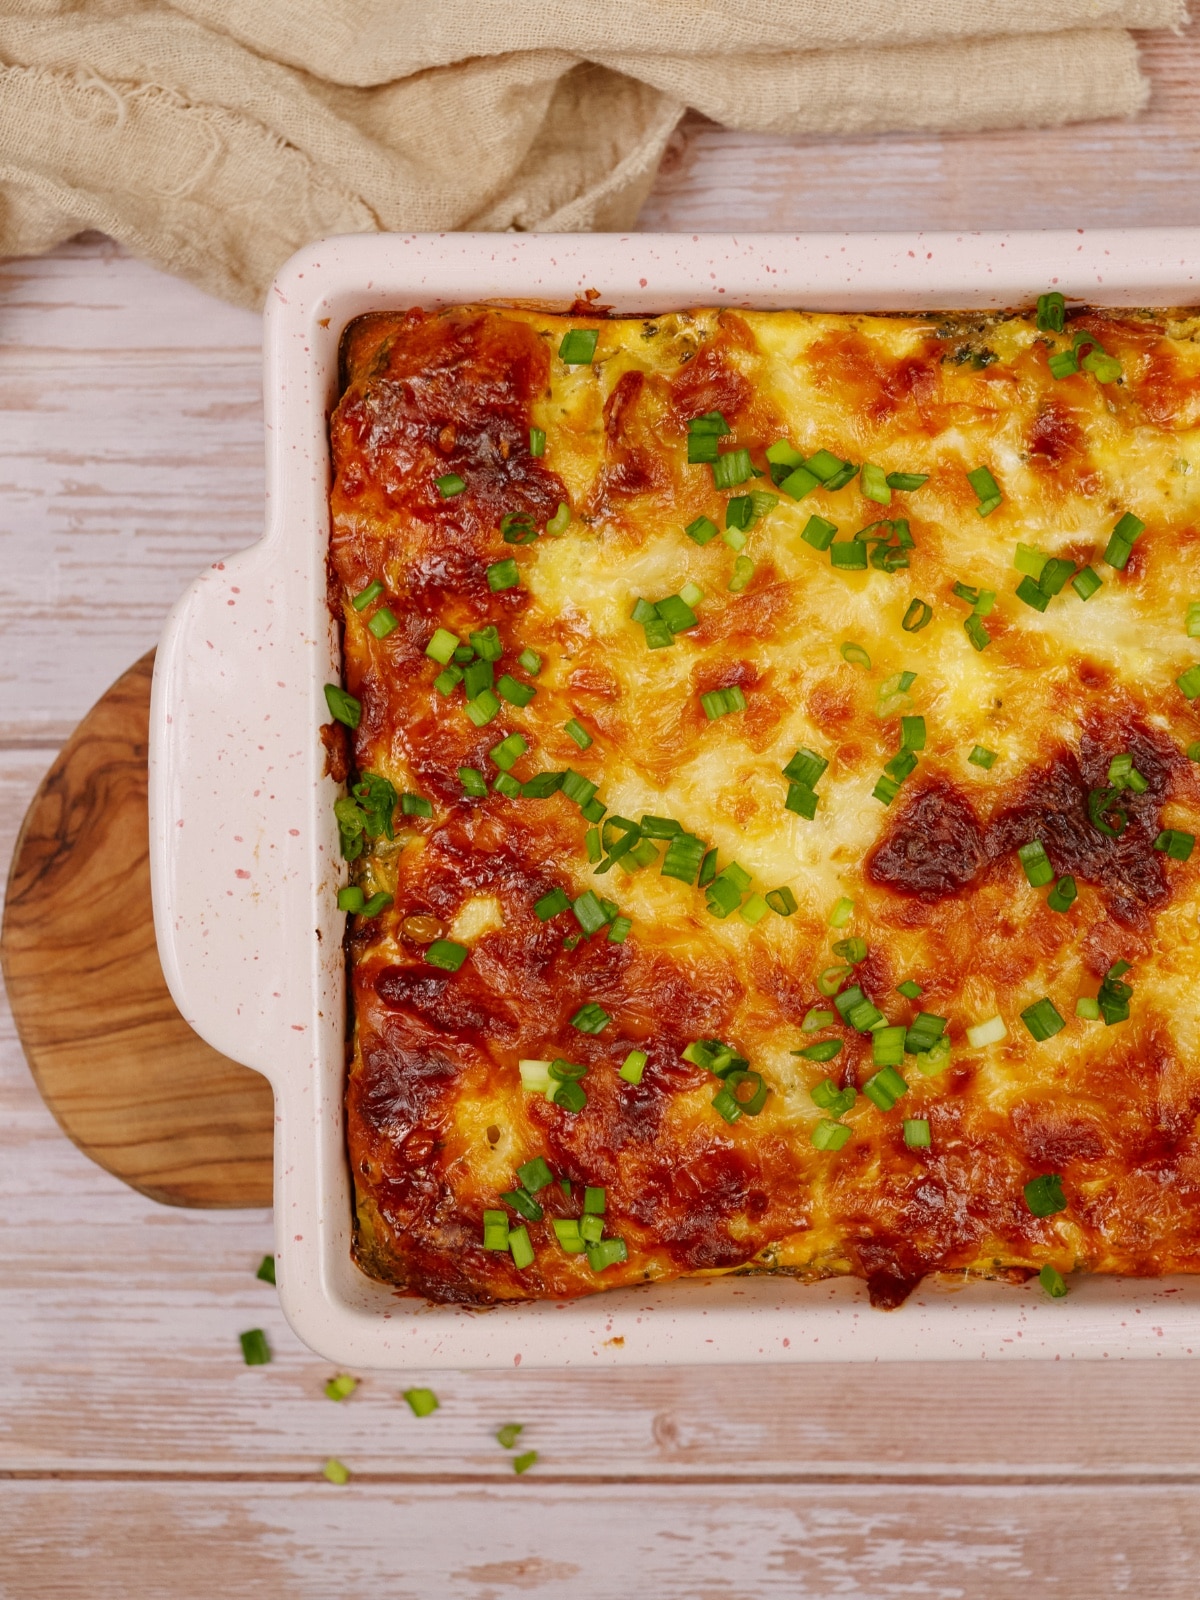 egg and hashbrown casserole in a baking dish